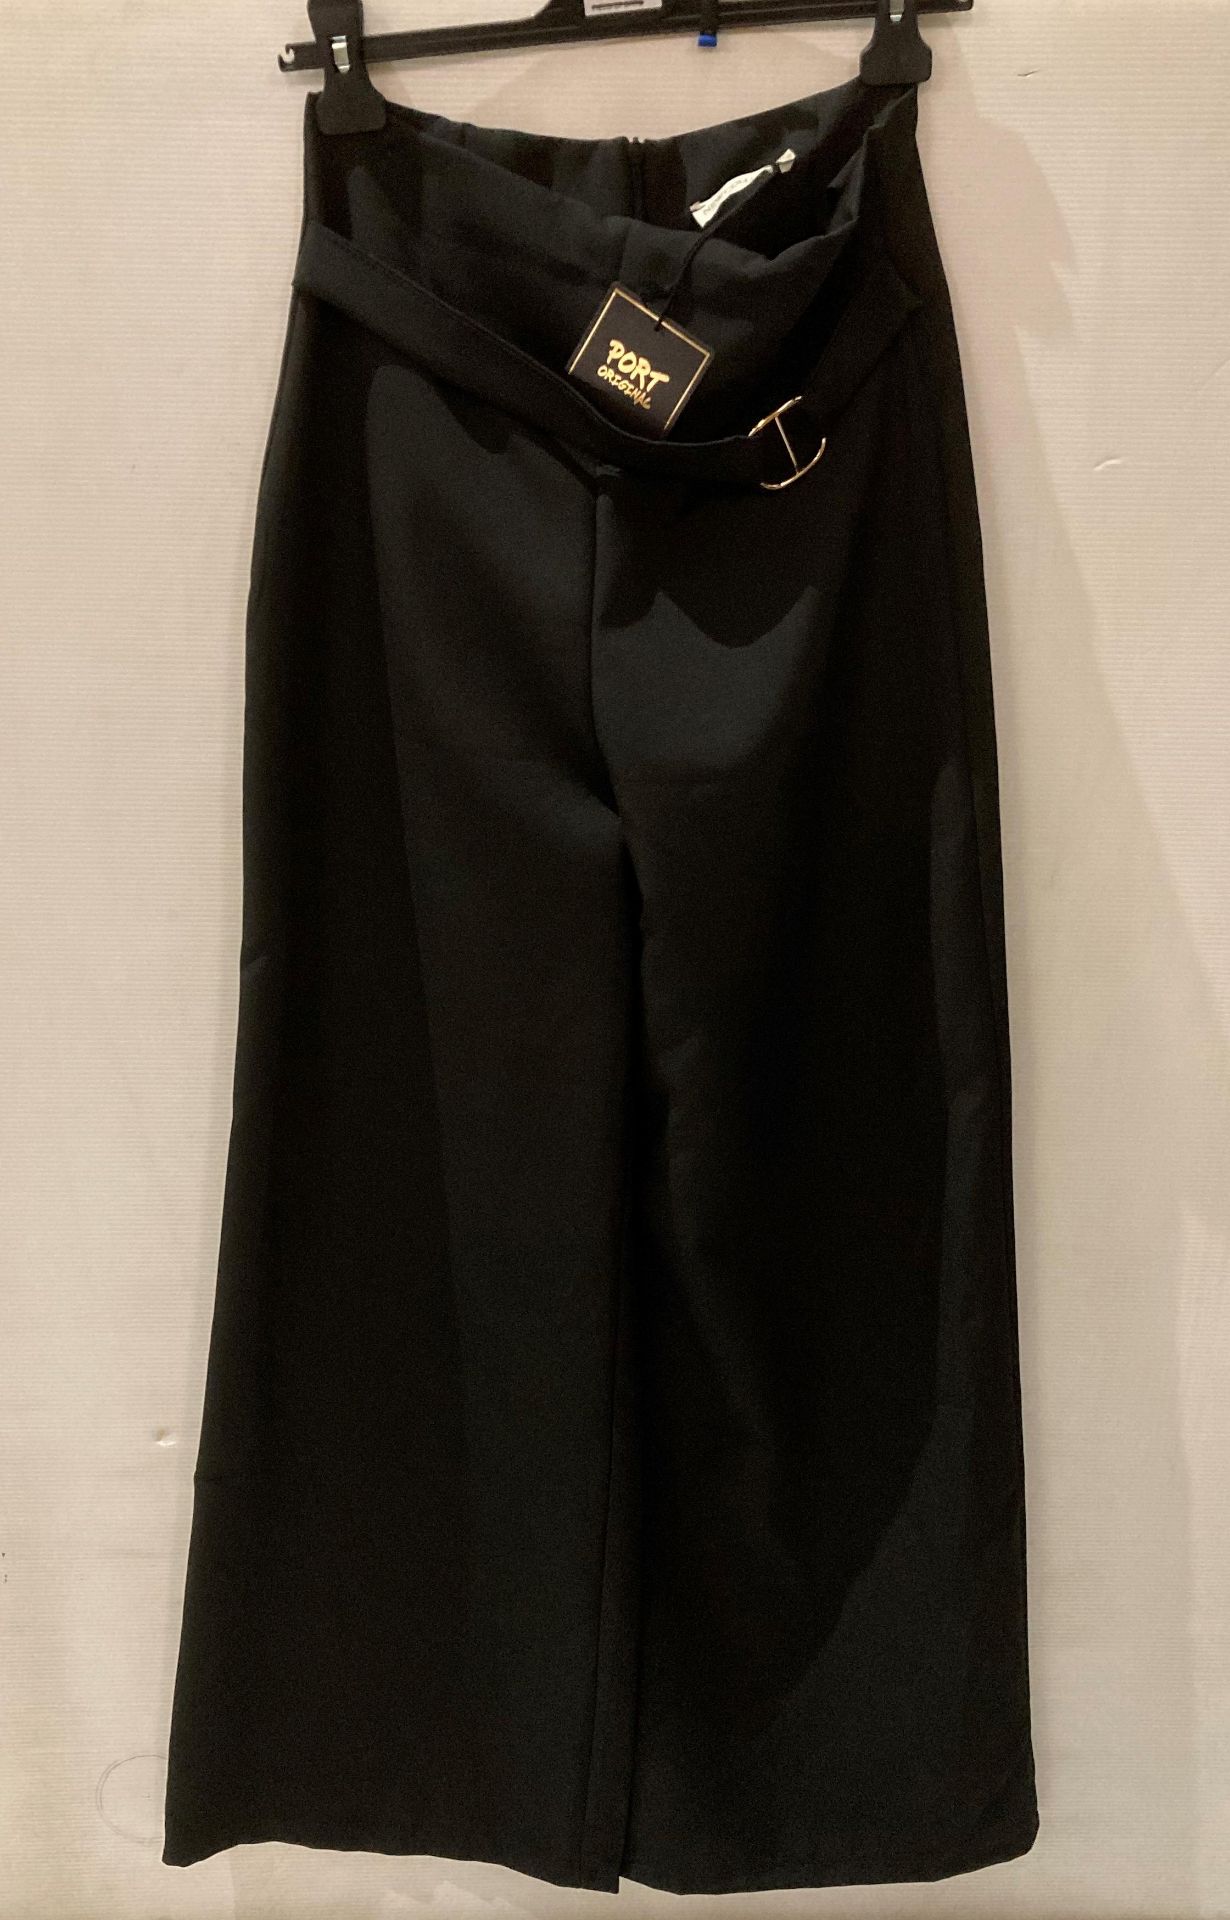 15 x New Collection black wide leg trousers with belt detail, sizes S,